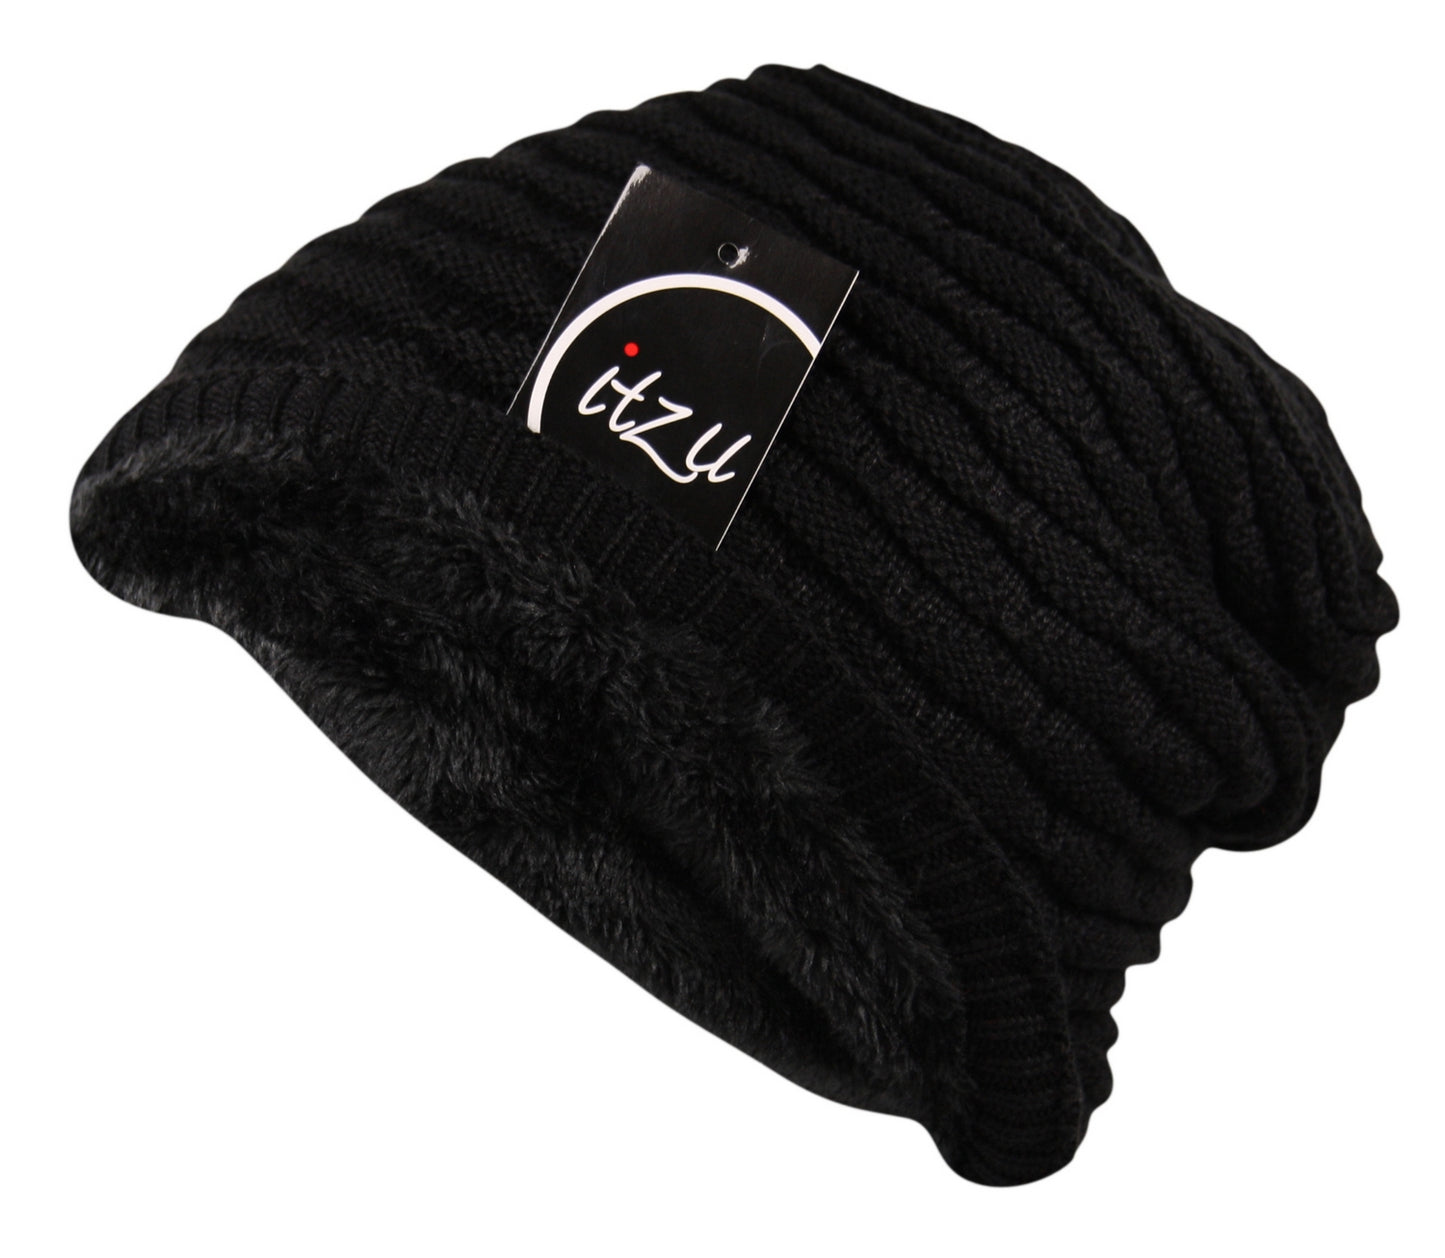 Unisex Knit Slouch Beanie Ribbed Hat in Black